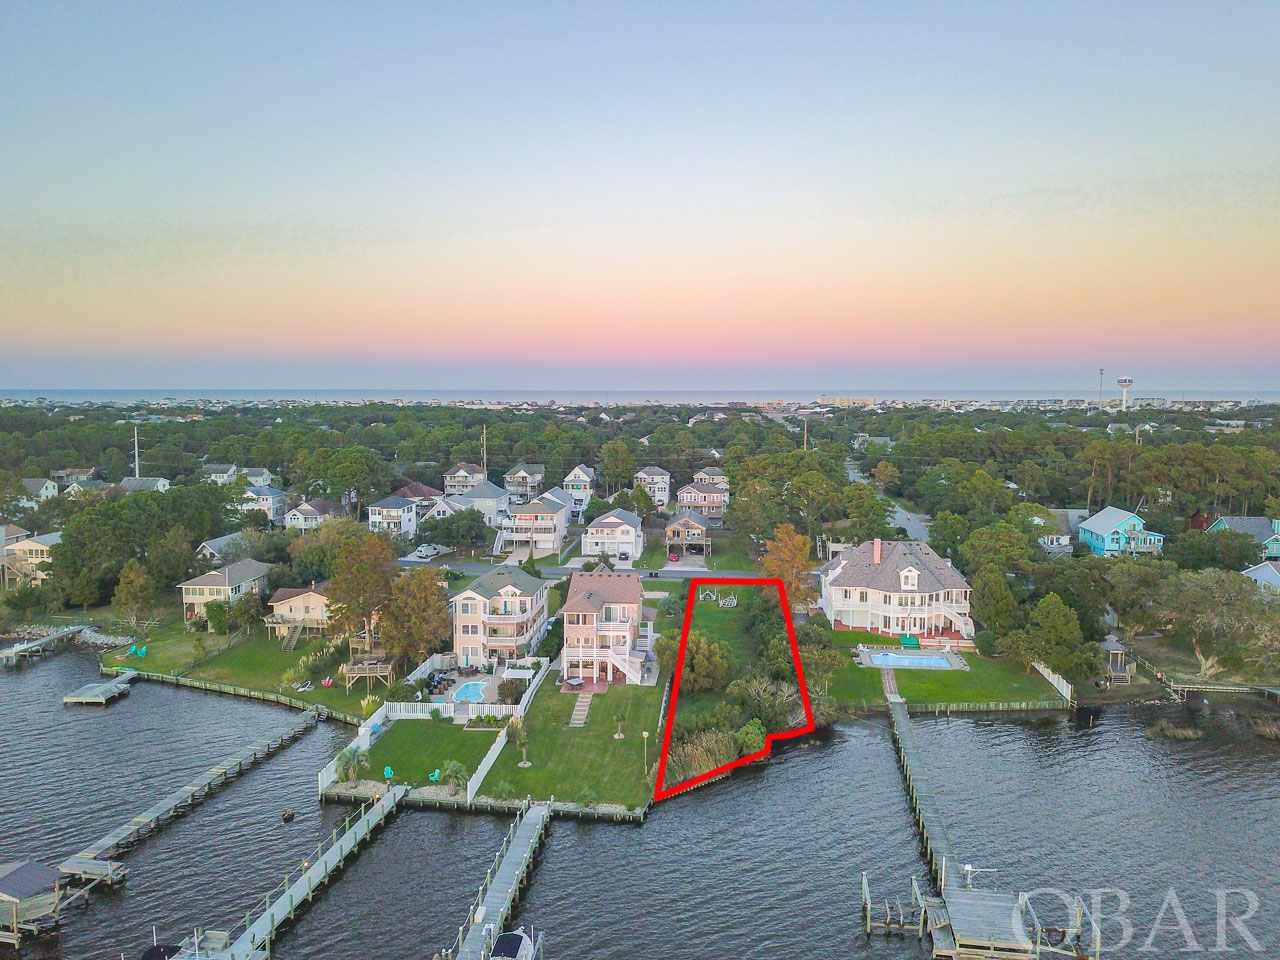 Rare Opportunity to own a Soundfront lot on Bay Drive!  The lot offers sweeping views of the sound and is the perfect location for your new soundfront home and dock.  The current owners added a bulkhead and 2 ft of fill.  The lot is ready to be built on!  Bay Drive is a centrally located and offers a multi-use path, gazebo, and public boat ramp.